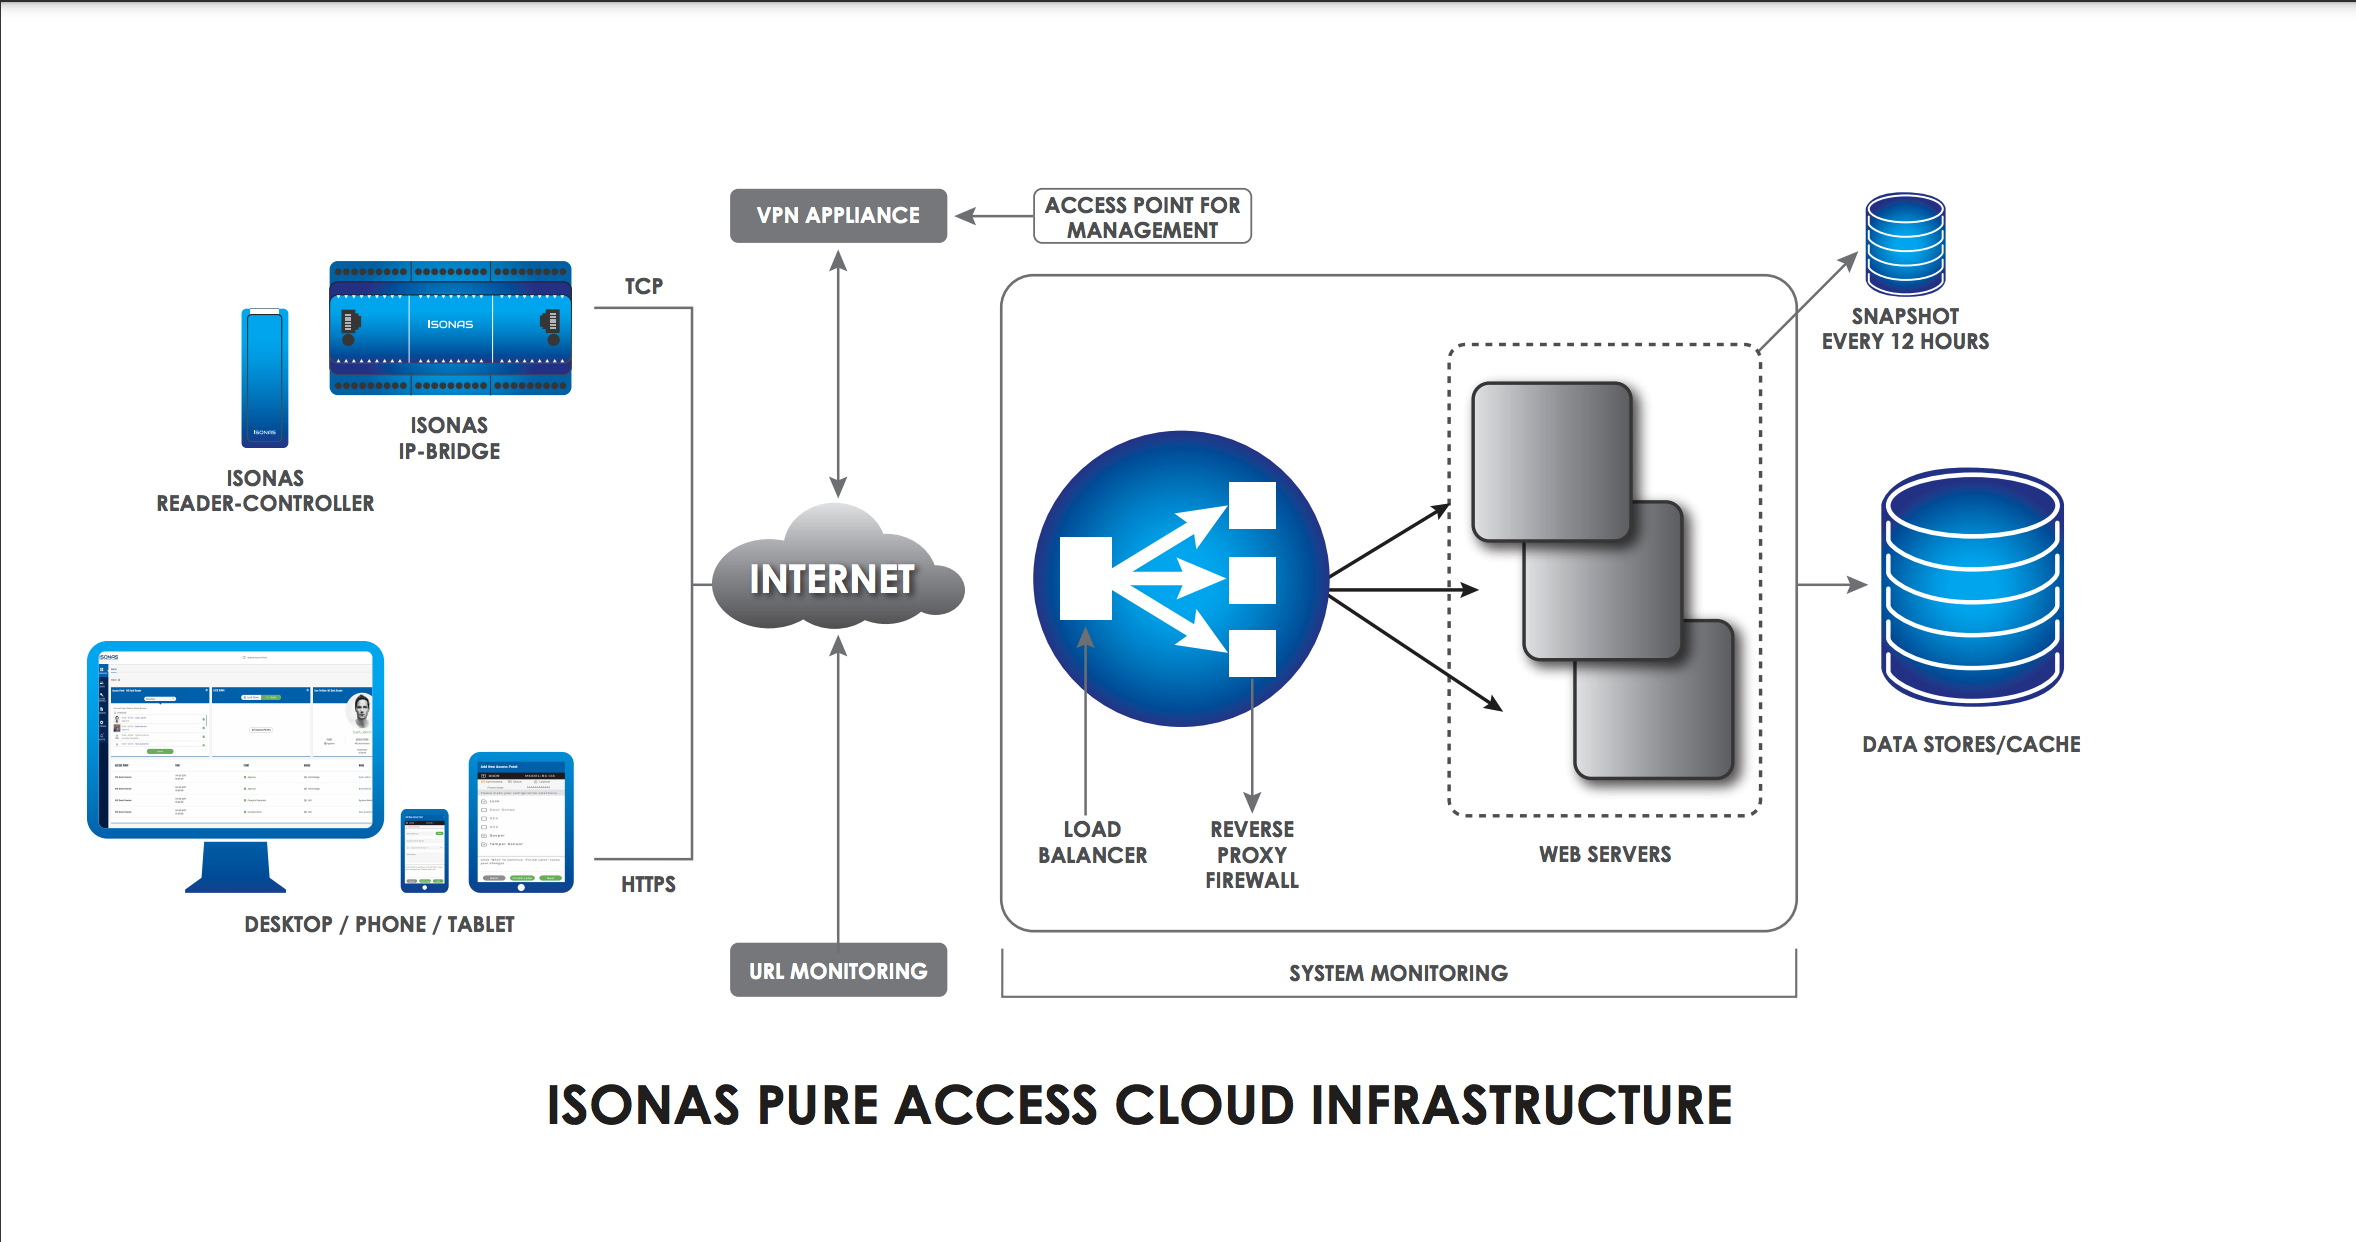 ISONAS Pure Access Cloud schematic